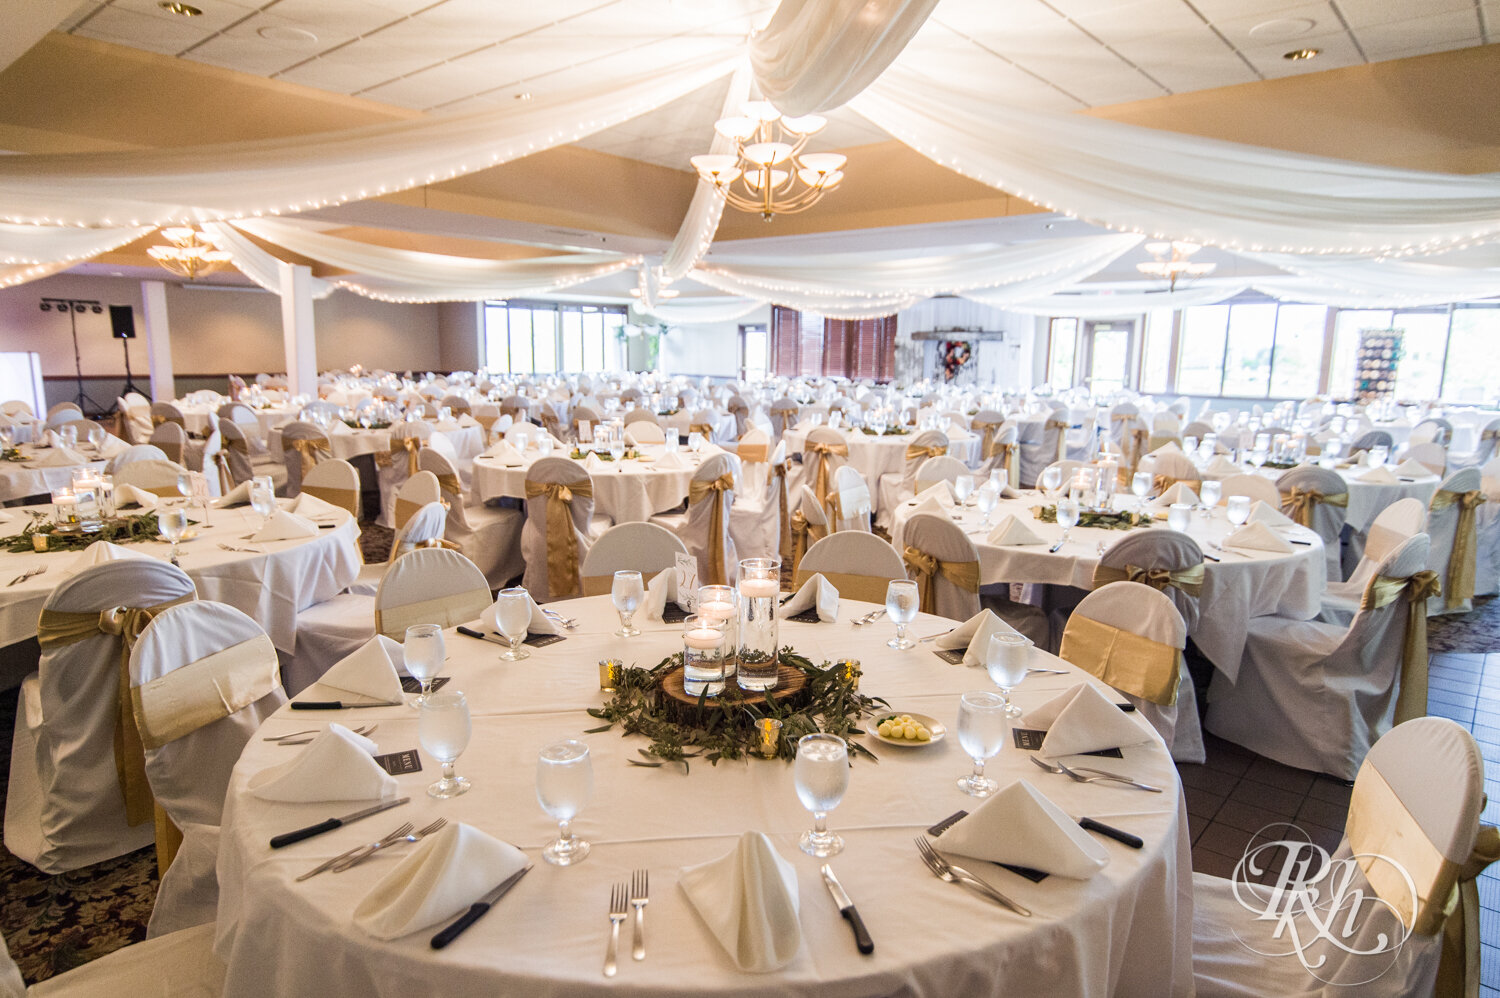 Indoor wedding reception setup at The Wilds Golf Club in Prior Lake, Minnesota.